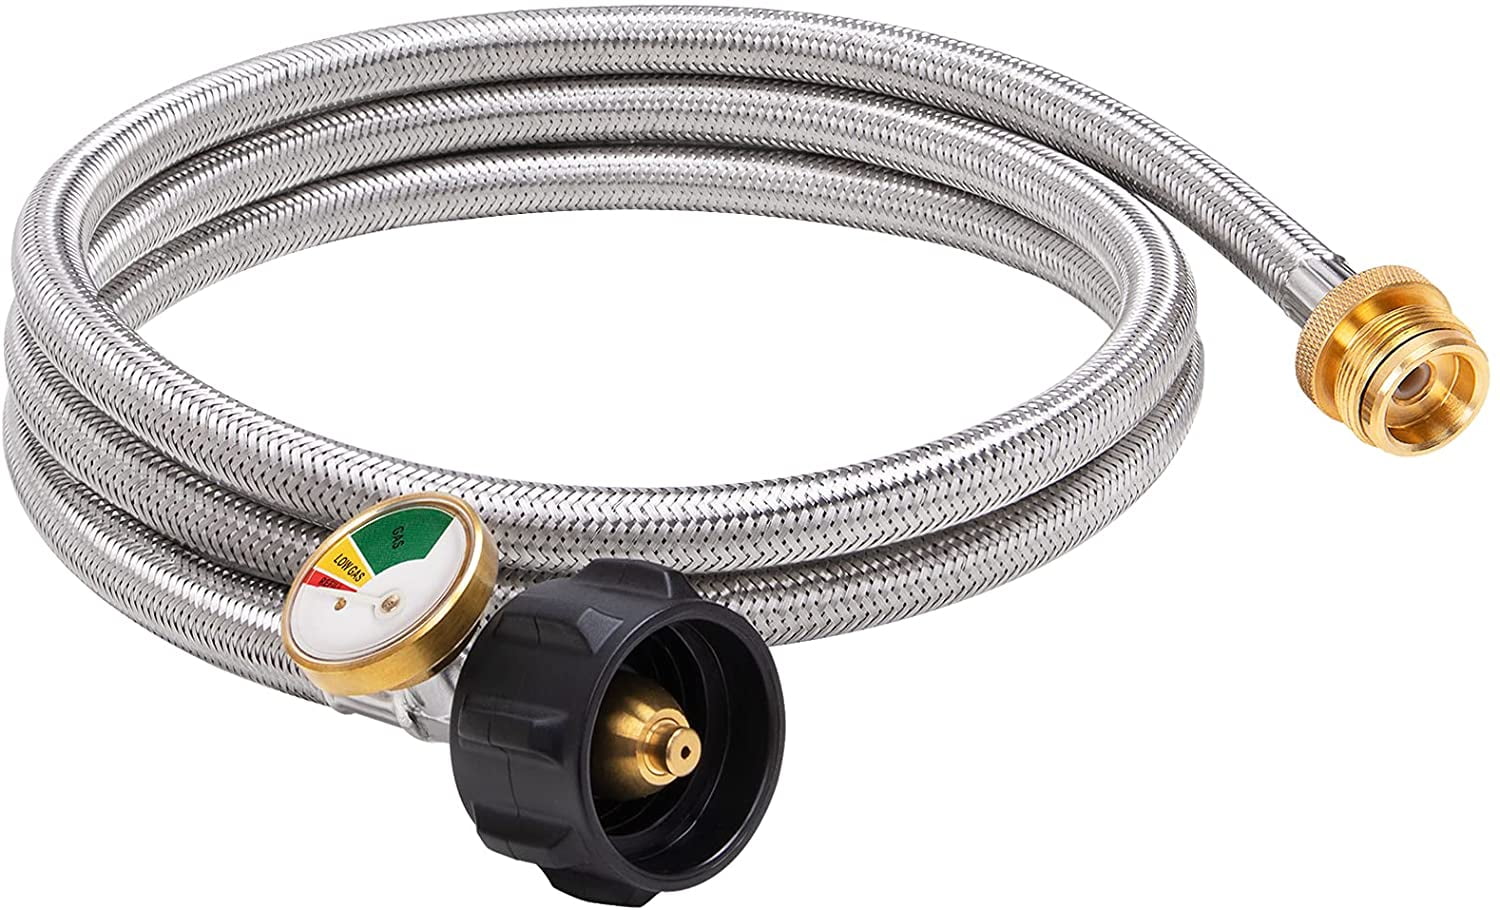  MEFUN 6Ft Stainless Braided Propane Tank Adapter Hose with  Gauge,1lb to 20lb Converter Propane Refill Adapter for QCC1/Type1 Coleman  Camp Stove,Buddy Heater, Tabletop Grill&More 1lb Portable Applianc : Patio,  Lawn